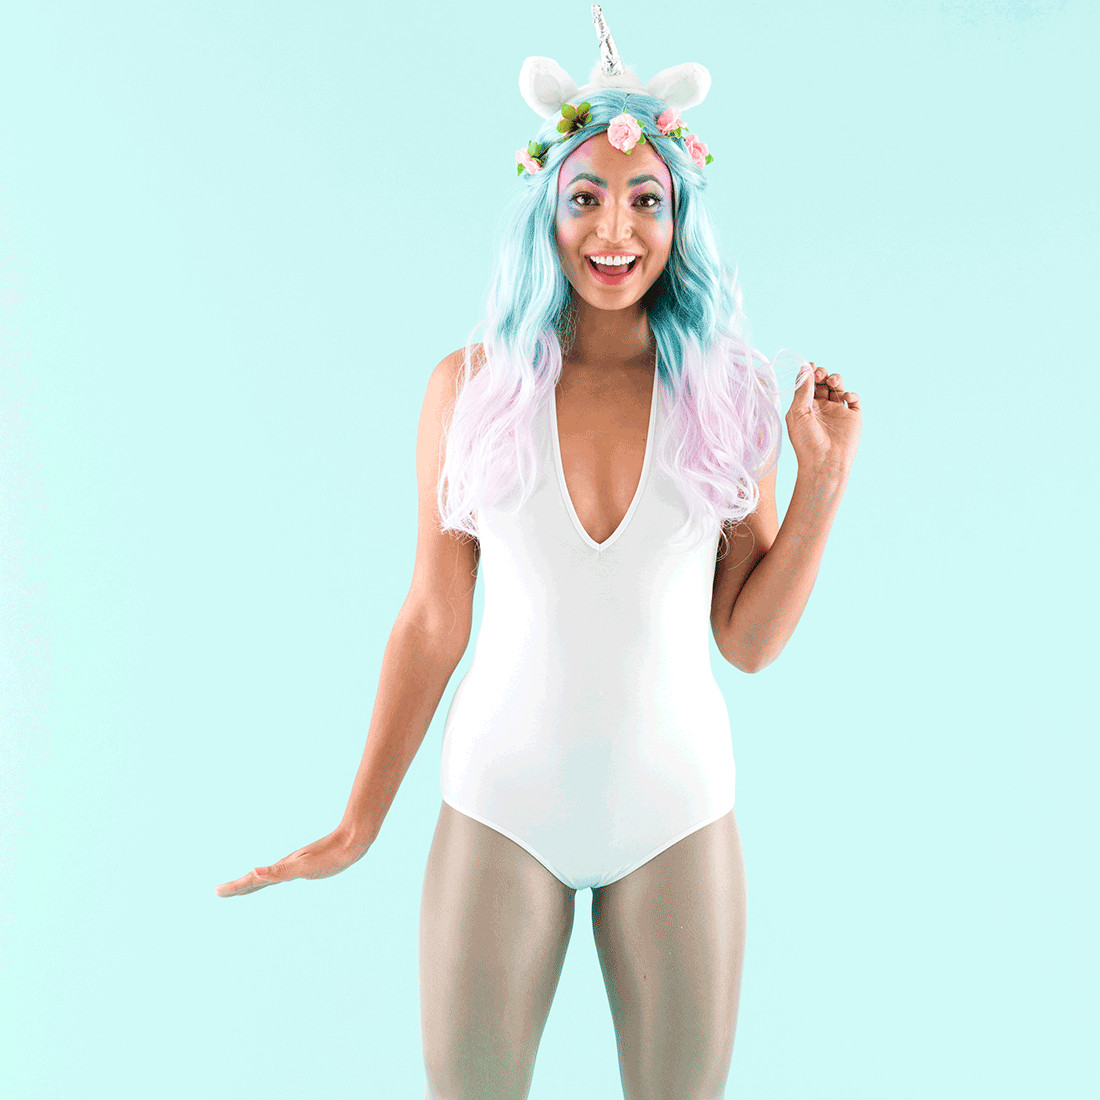 DIY Adult Unicorn Costume
 Fulfill Your Dream of Being a Unicorn With This DIY